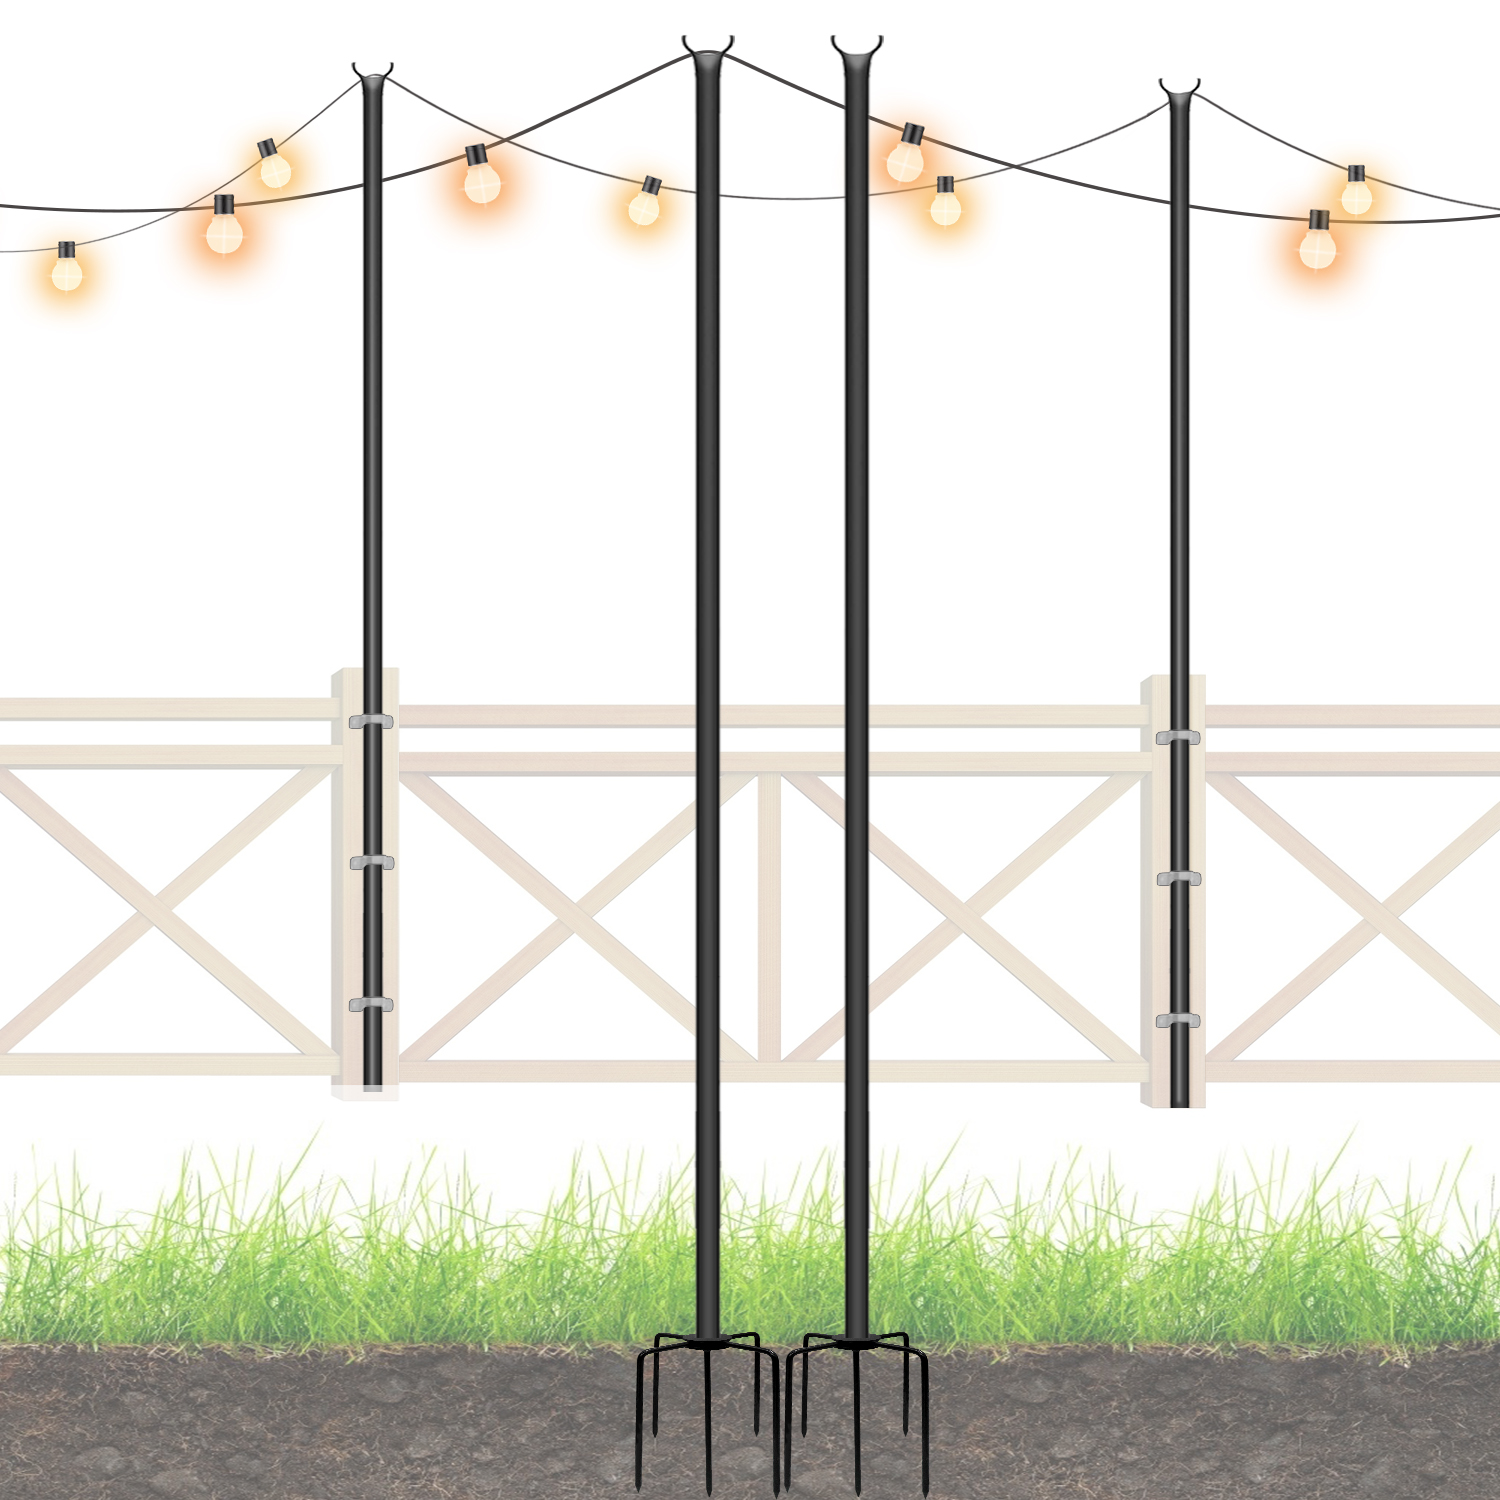 Lilypelle String Light Poles Stand for Outside, Prong Fork Backyard  Outdoor Lights Pole, Pack Poles Stand for Patio, Garden, Christmas, Yard.  (9 FT x 25 mm)